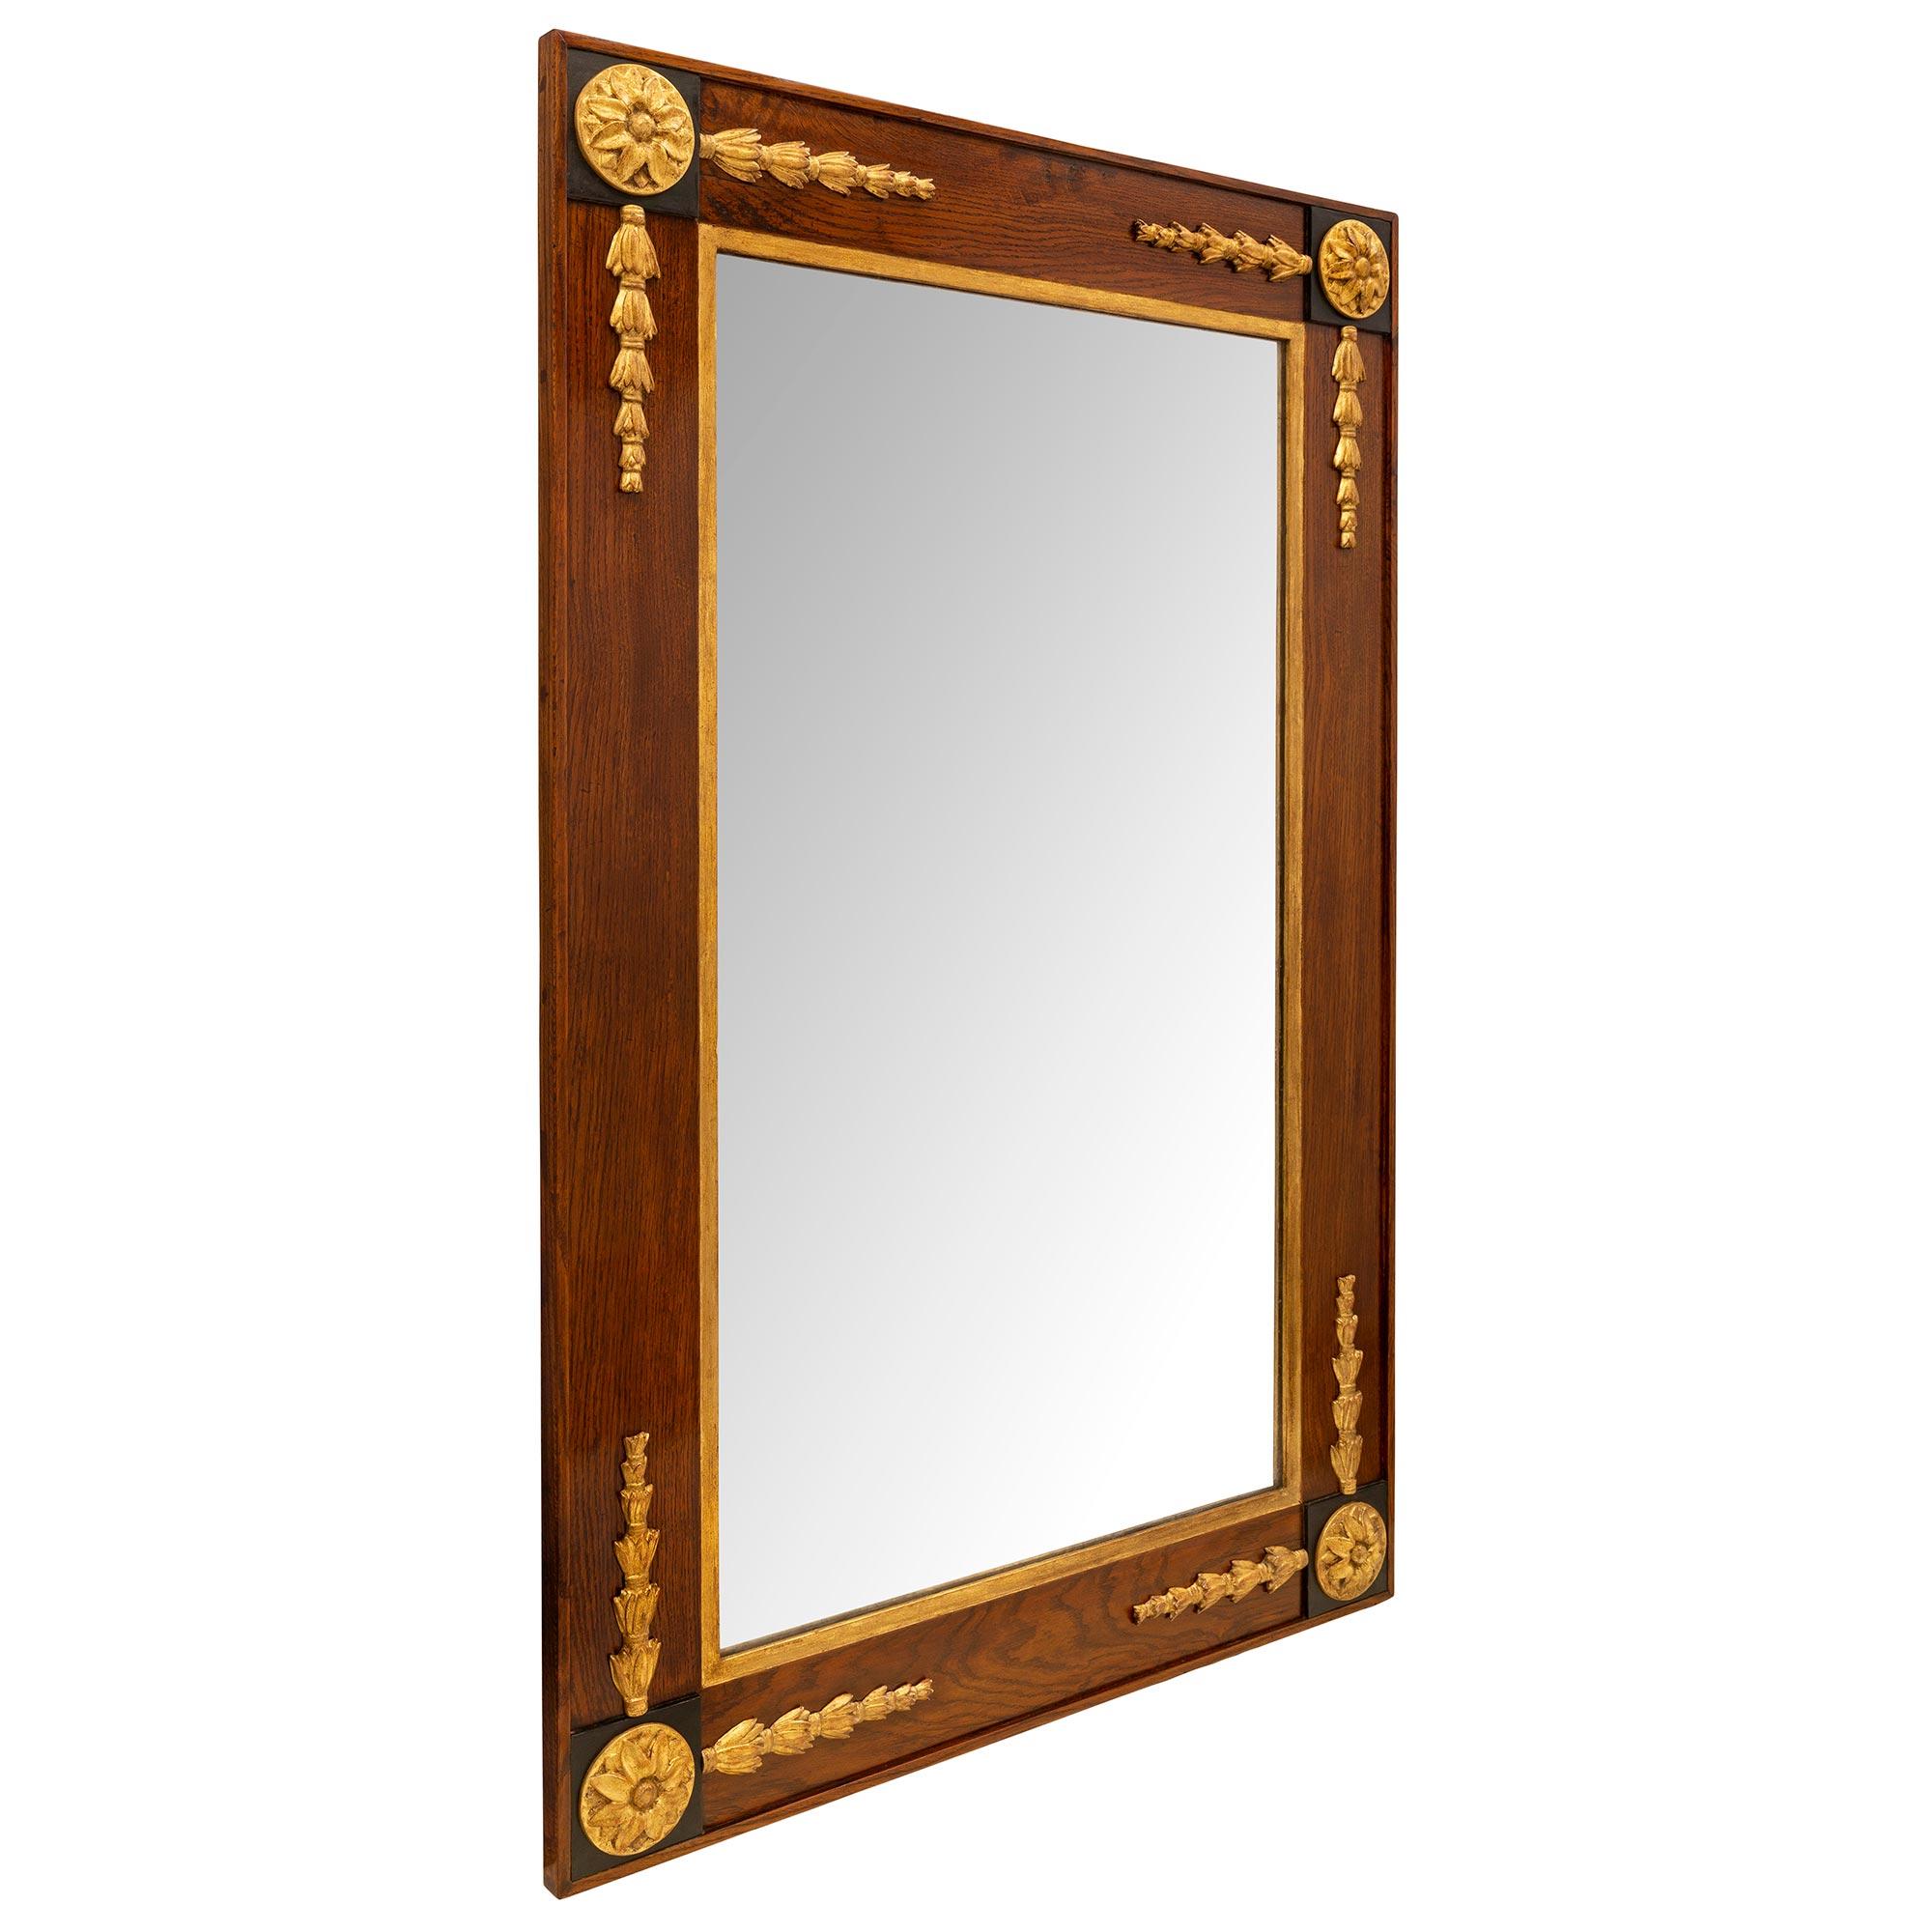 A handsome Italian 18th century Tuscan st. walnut, ebonized fruitwood, and giltwood mirror. The original central mirror plate is set within a fine giltwood border and beautiful walnut frame showcasing the warm wood grain. At each corner are richly